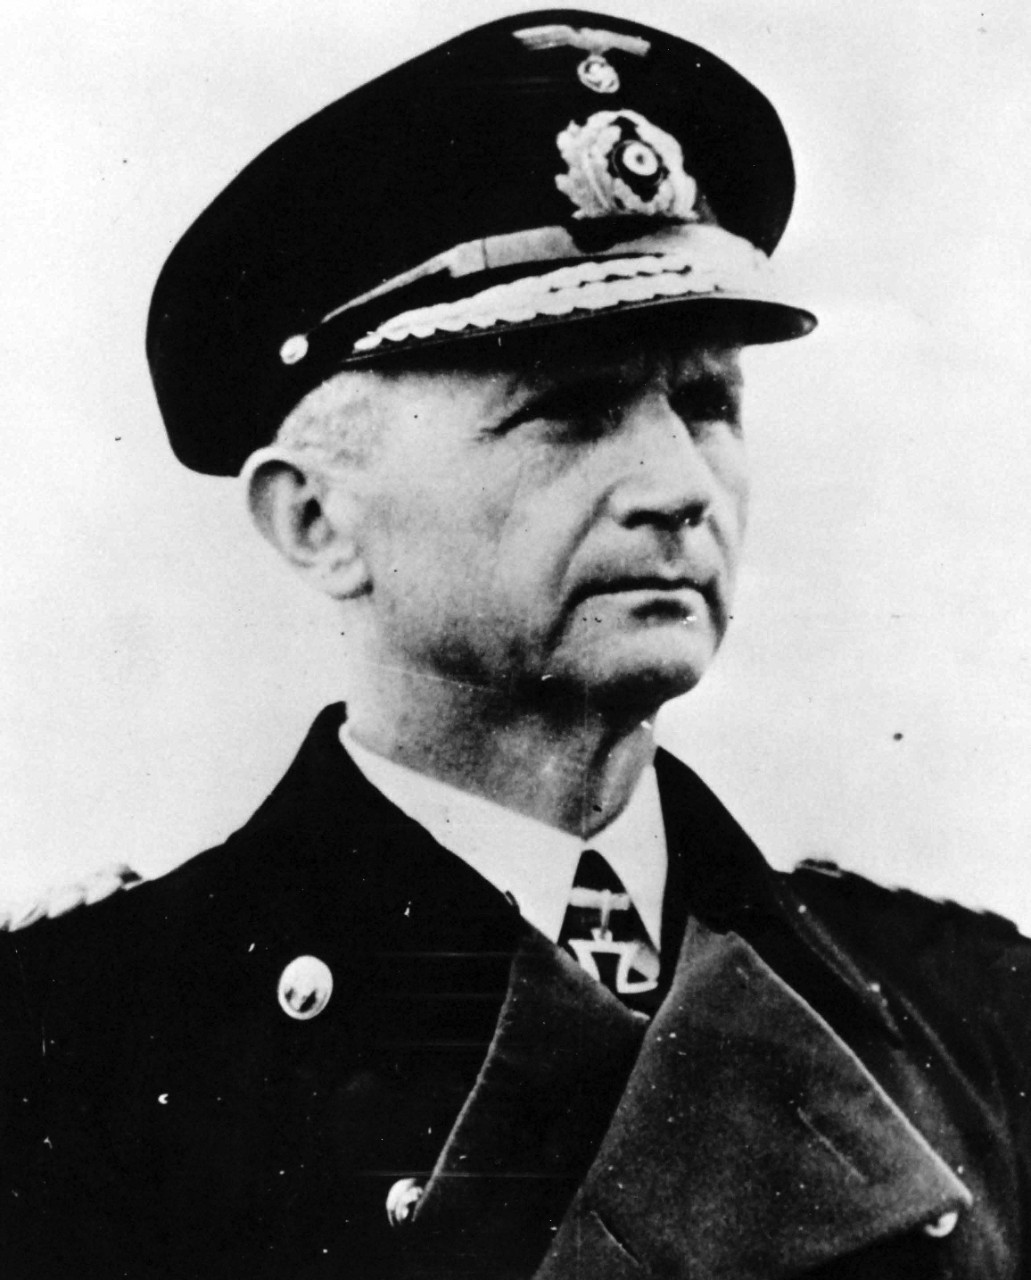 208-PU-52-P-1:  Surrender of Germany,  May 1945. Grand Admiral Karl Doenitz, German Navy, successor to the Fuehrer.   Office of War Information Photograph, now in the collections of the National Archives.  (2017/05/02). 